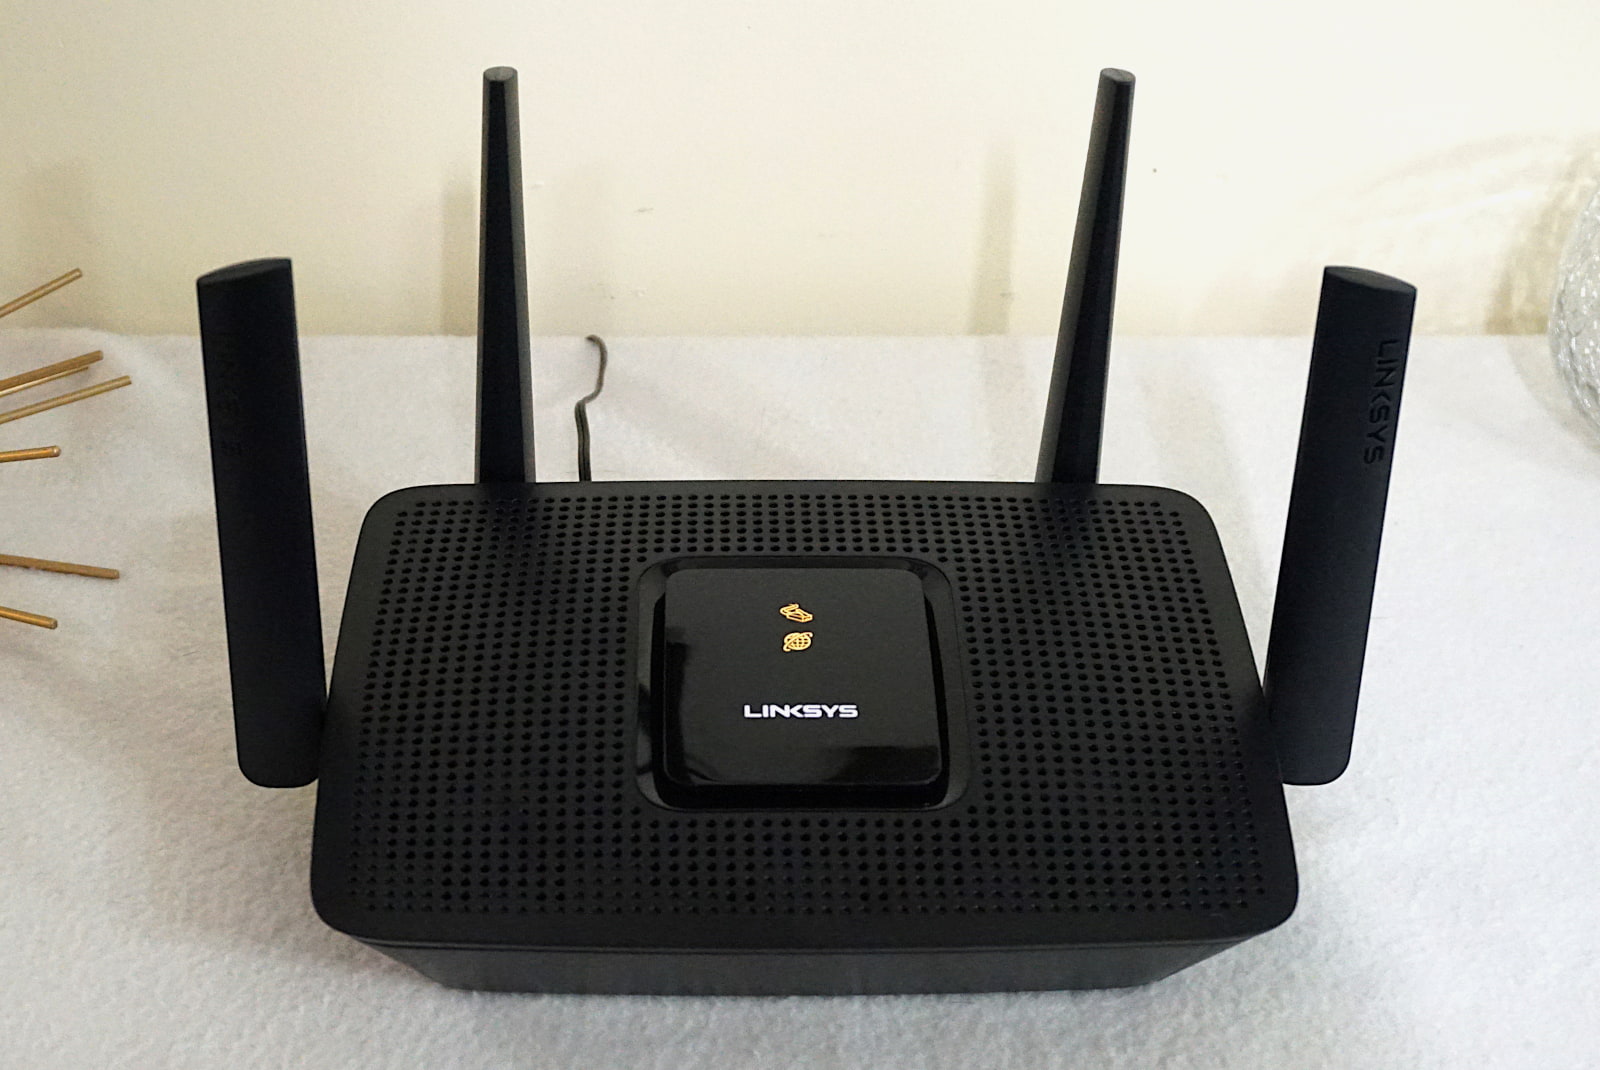 Linksys EA8300 from above